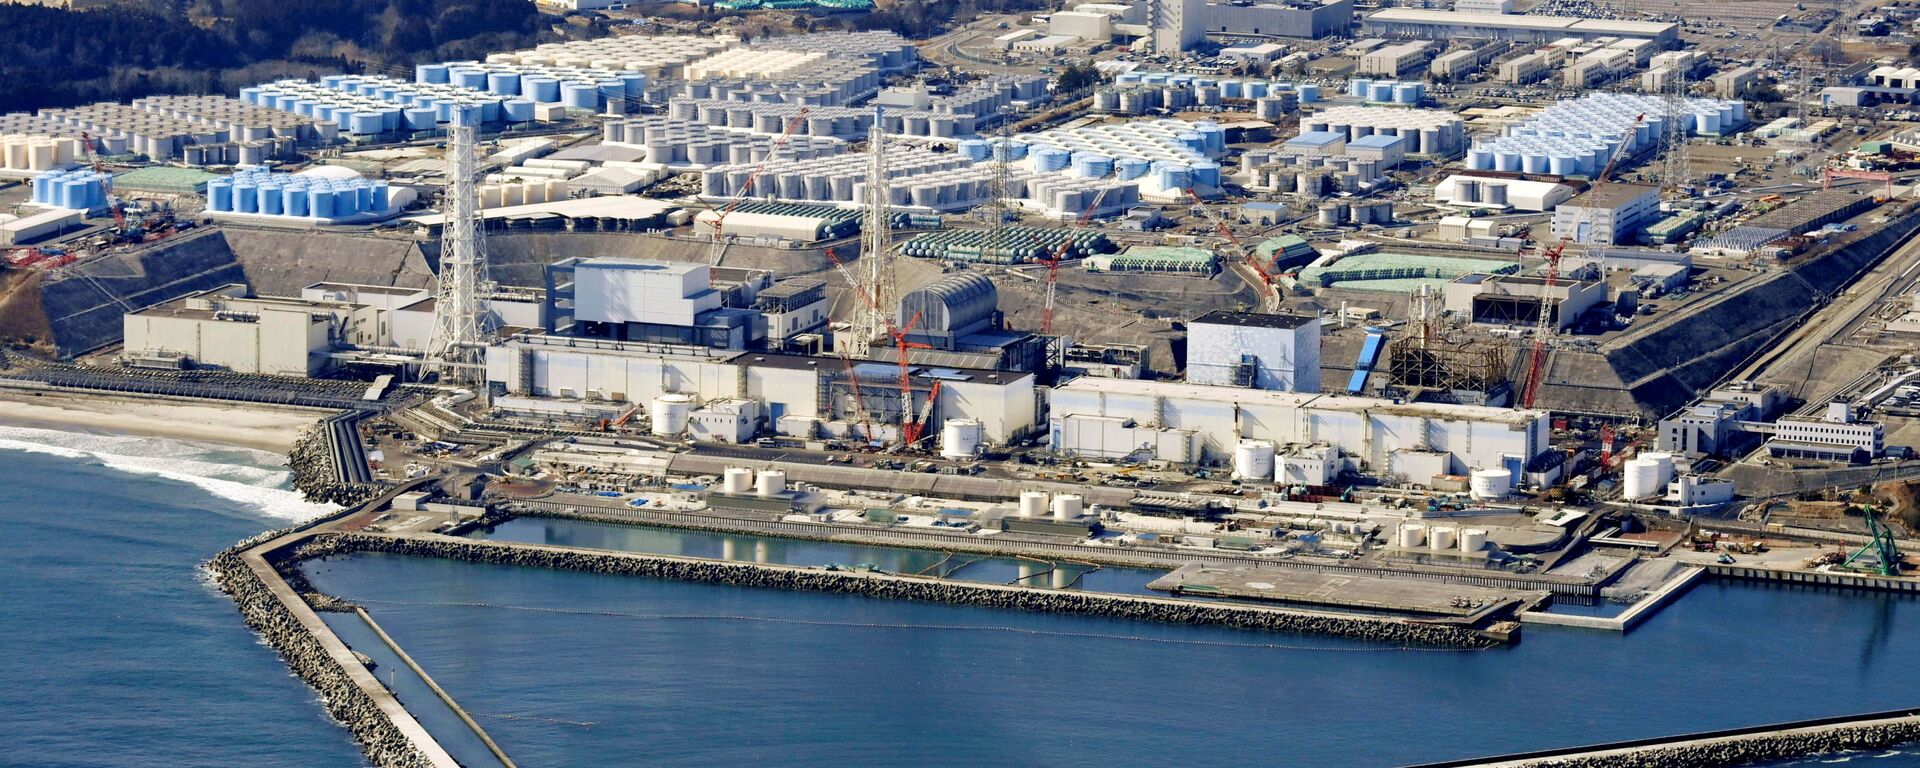 An aerial view shows the storage tanks for treated water at the tsunami-crippled Fukushima Daiichi nuclear power plant in Okuma town, Fukushima prefecture, Japan February 13, 2021, in this photo taken by Kyodo. - Sputnik International, 1920, 22.12.2021